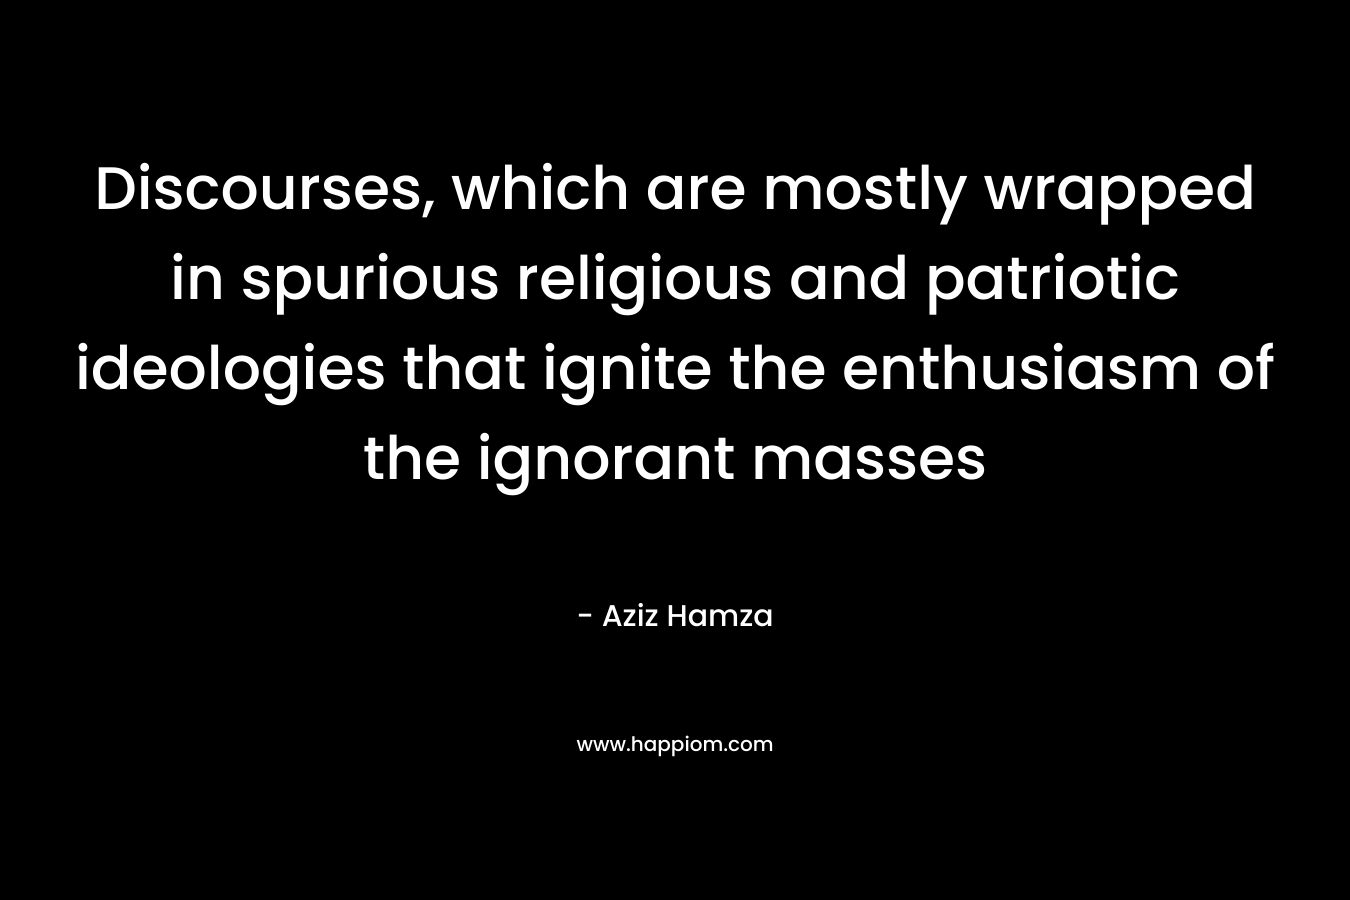 Discourses, which are mostly wrapped in spurious religious and patriotic ideologies that ignite the enthusiasm of the ignorant masses – Aziz Hamza